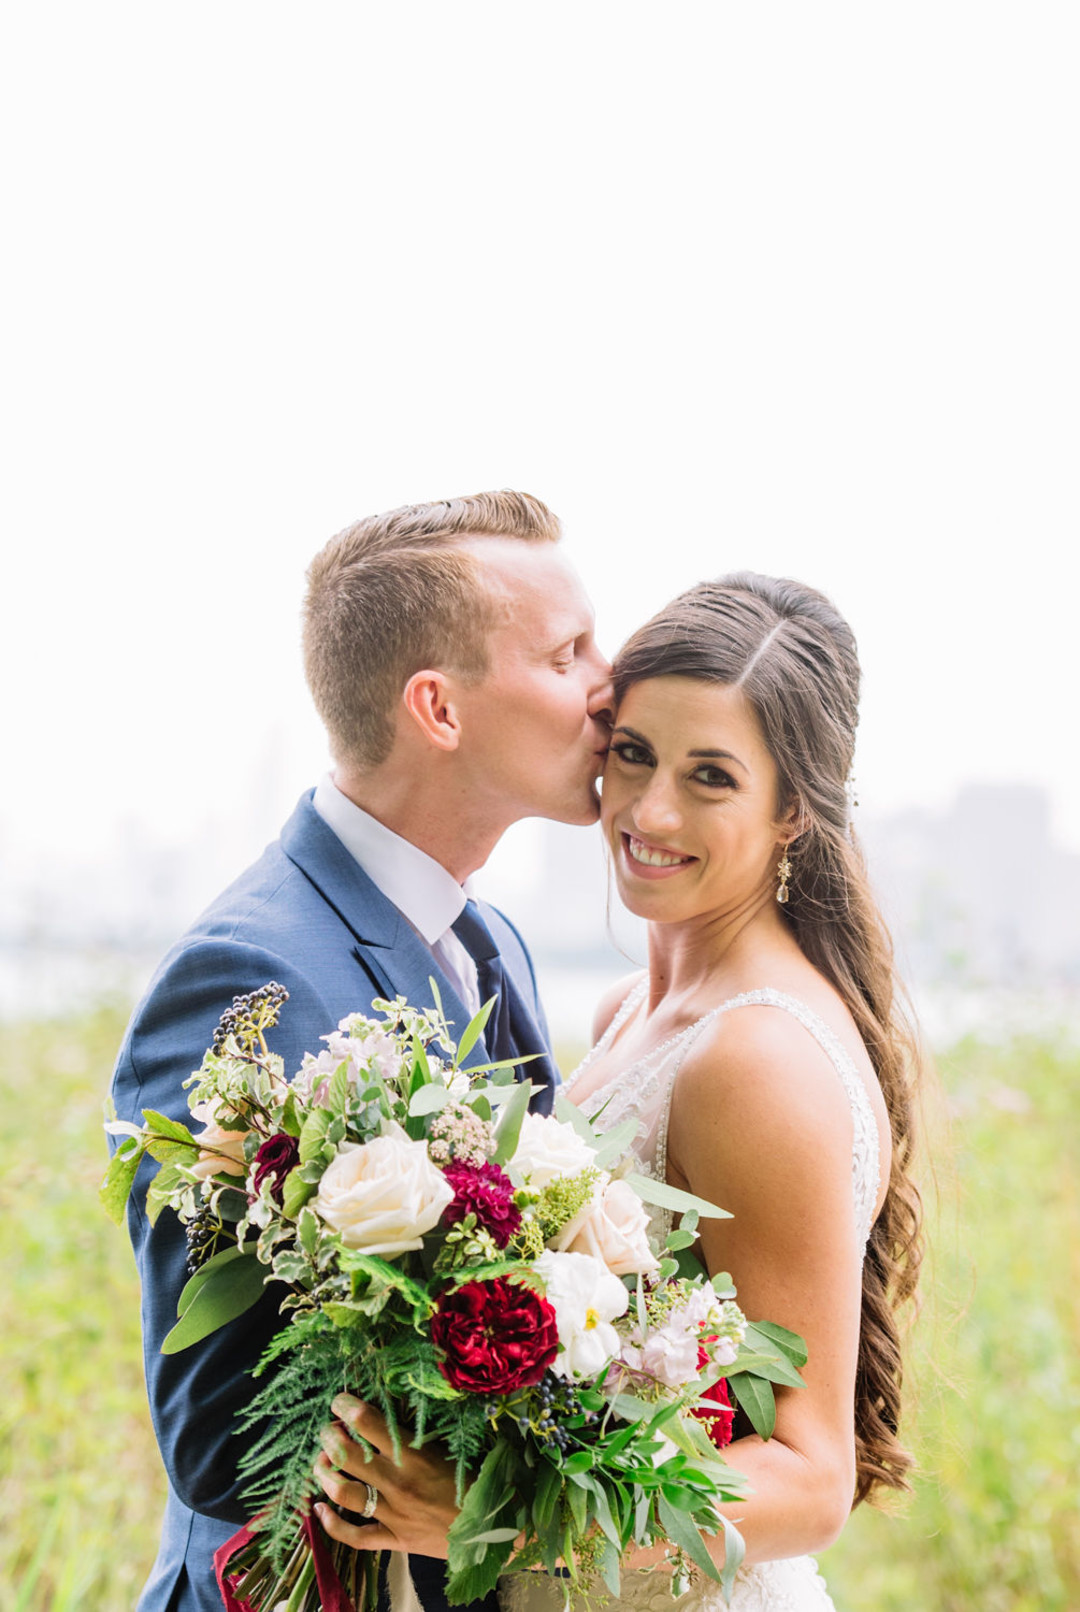 Modern industrial Chicago wedding planned by Alexa Kay Events and captured by Raegan Lintner Photography. See more modern wedding inspiration at CHItheeWED.com!